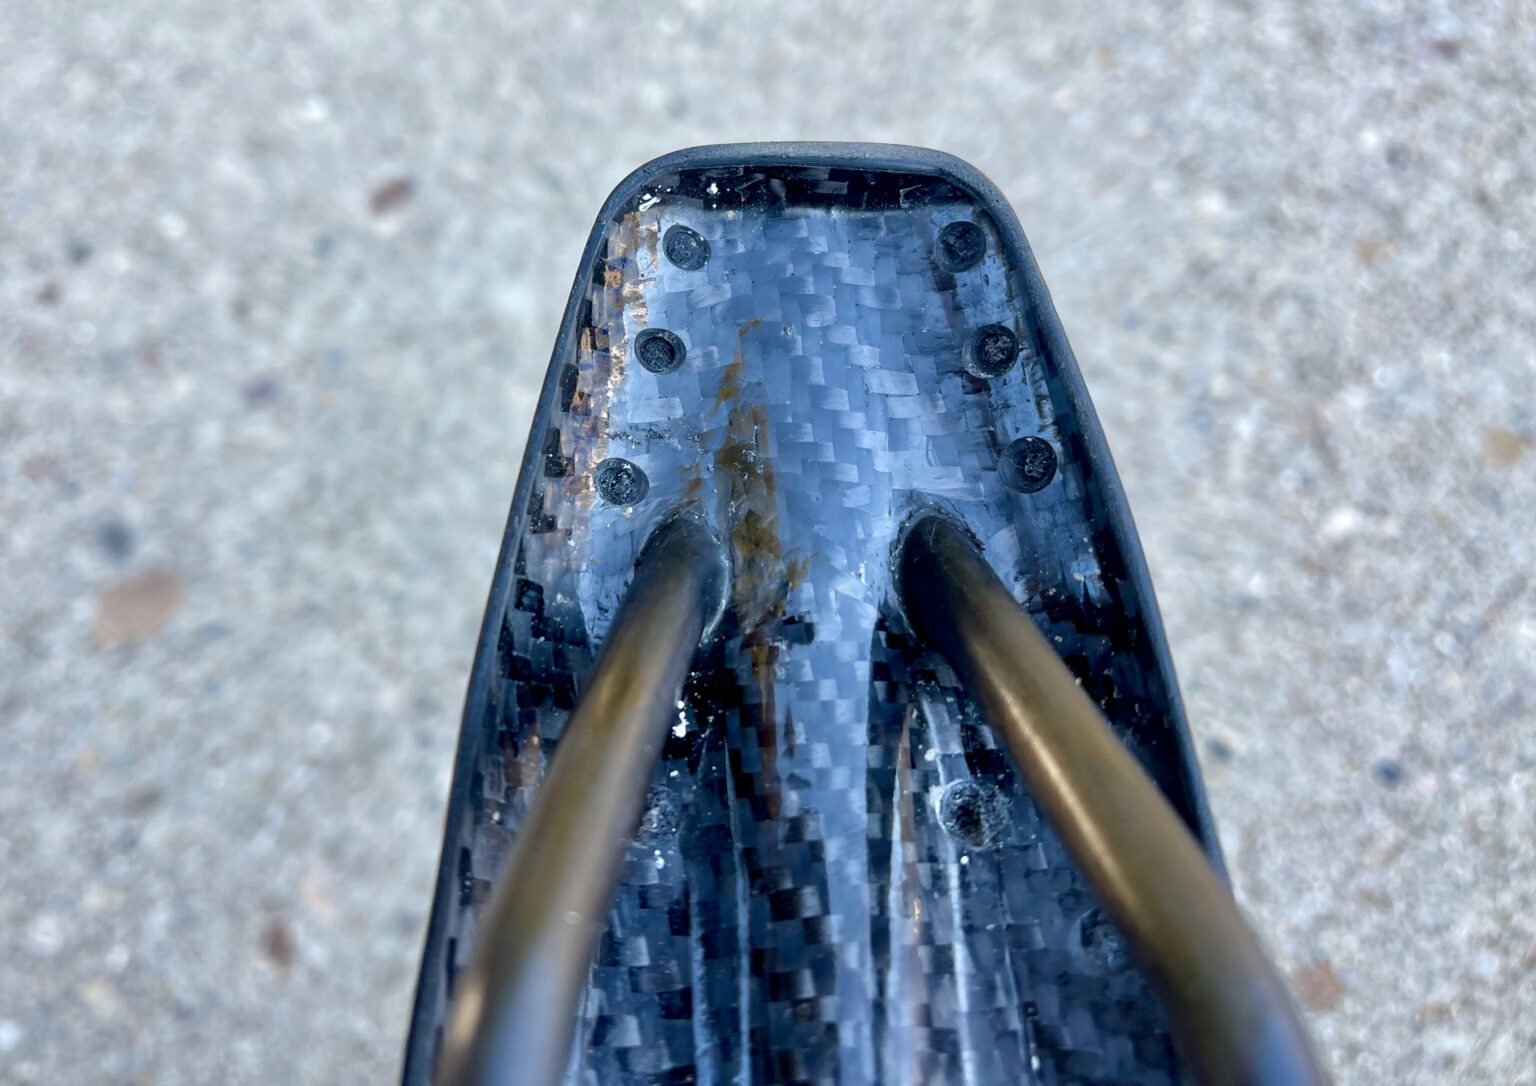 WOVE Mags Saddle Review detail number nose